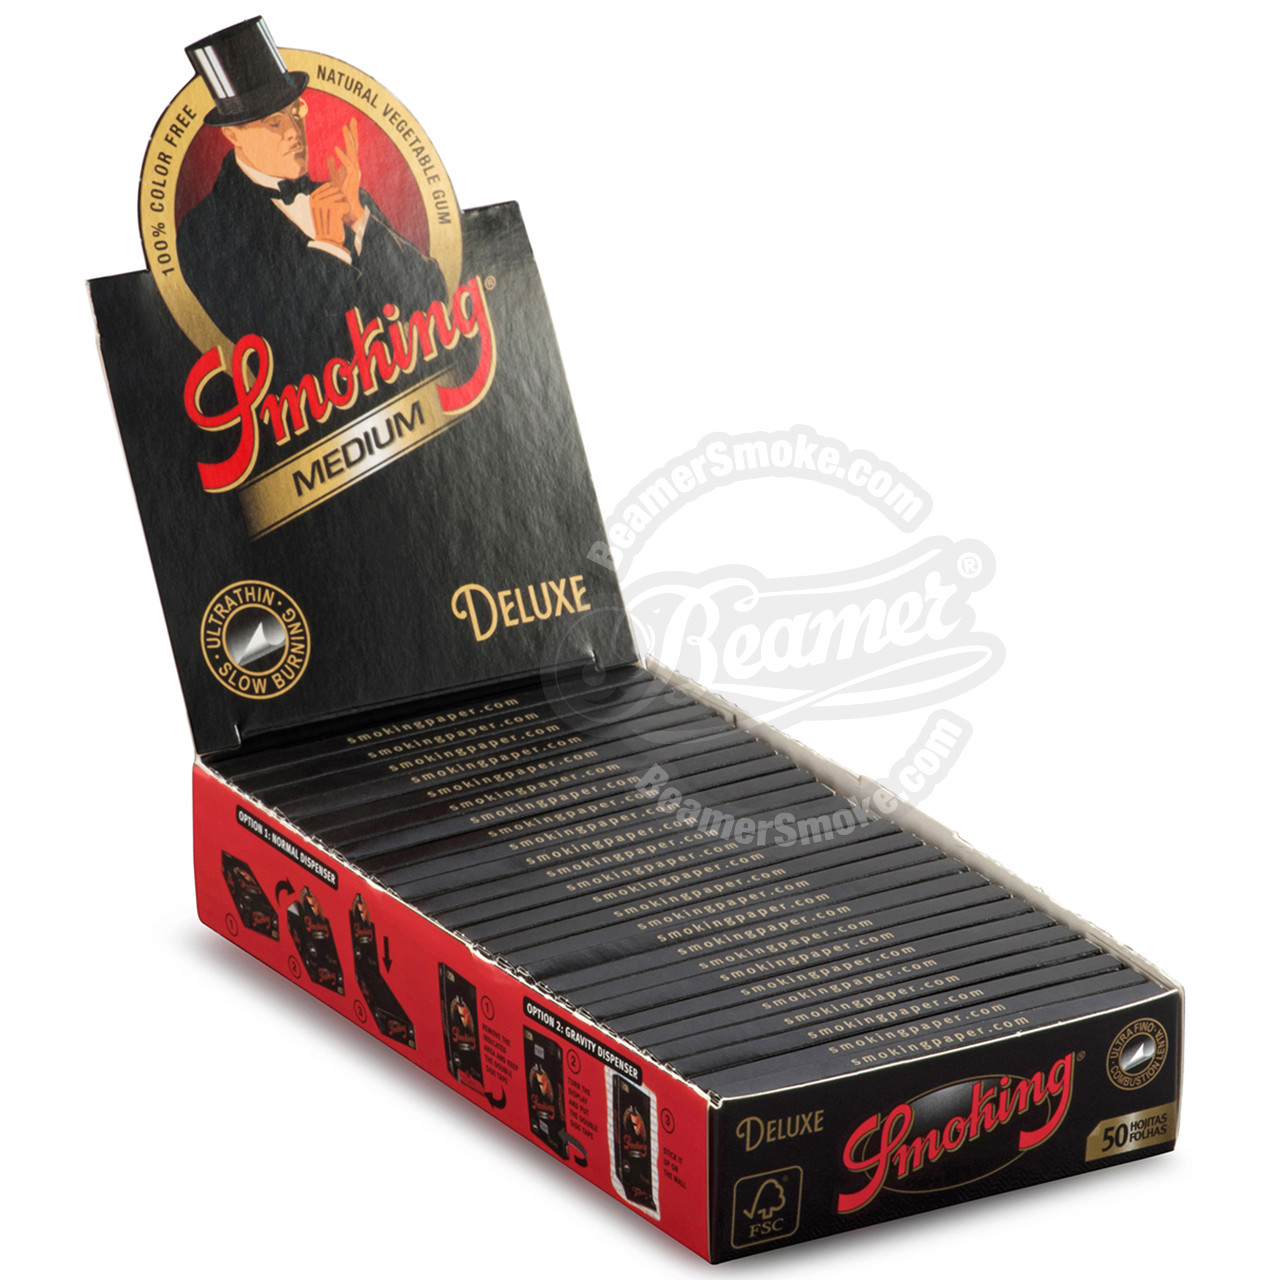 Smoking Deluxe 1 1/4 Rolling Paper ROLL